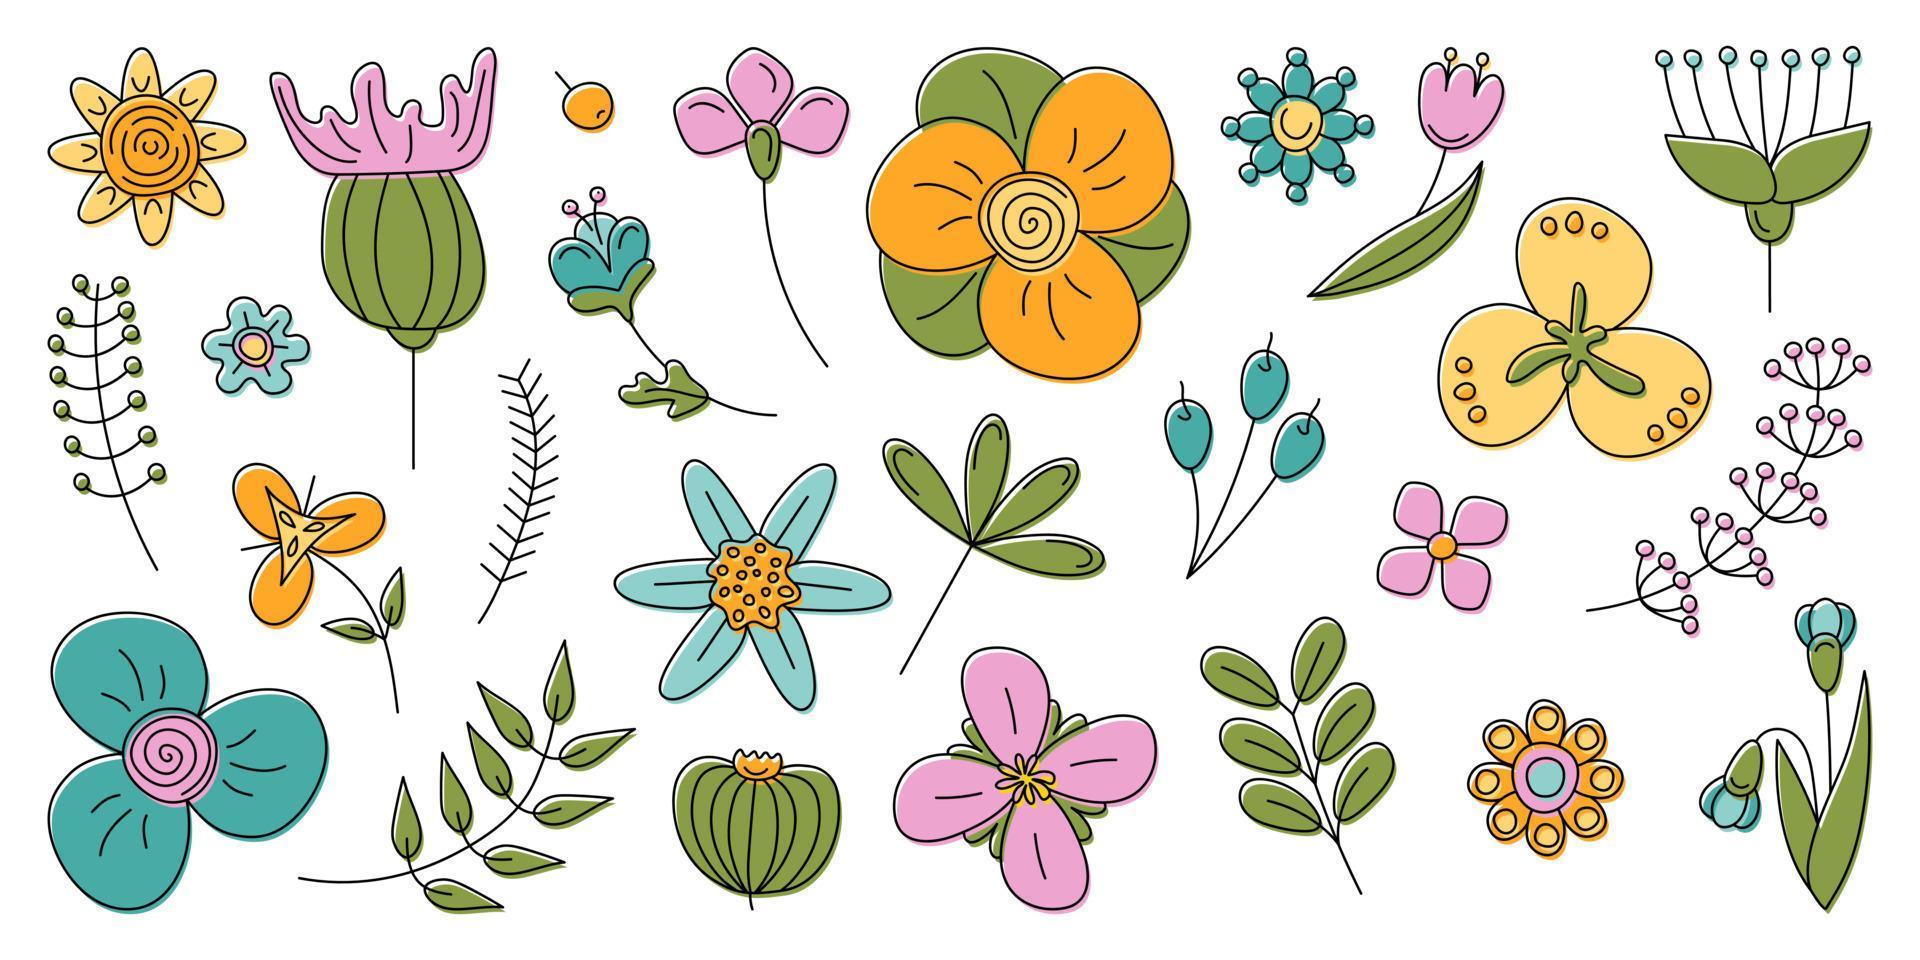 Flowers set. Floral and plants colorful vector elements.